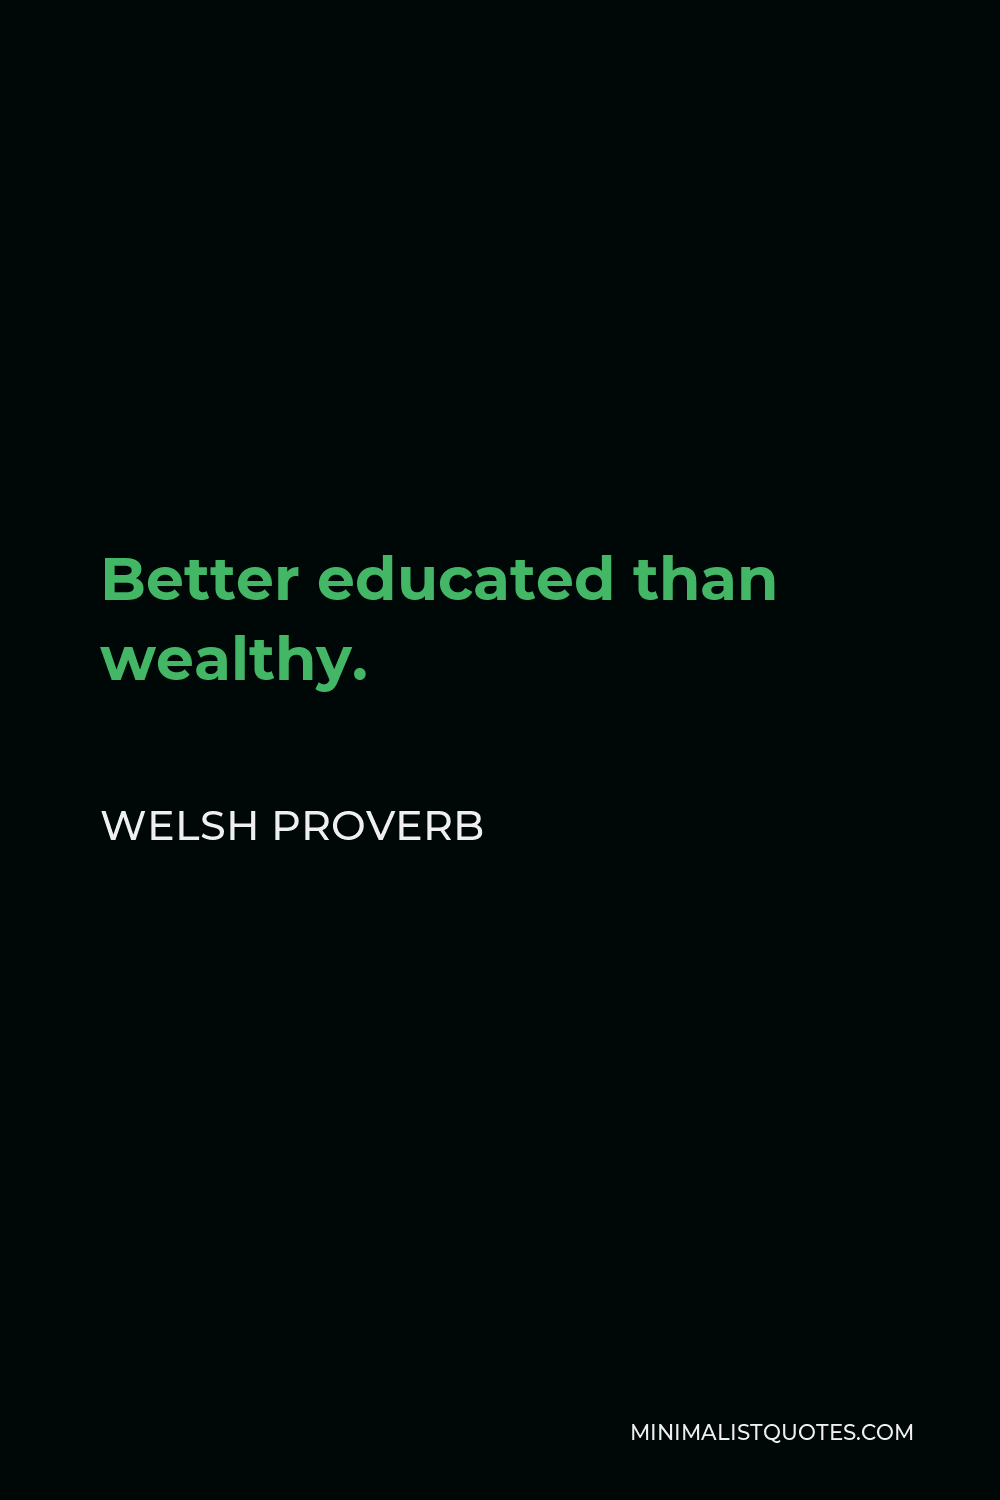 Welsh Proverb Quote - Better educated than wealthy.